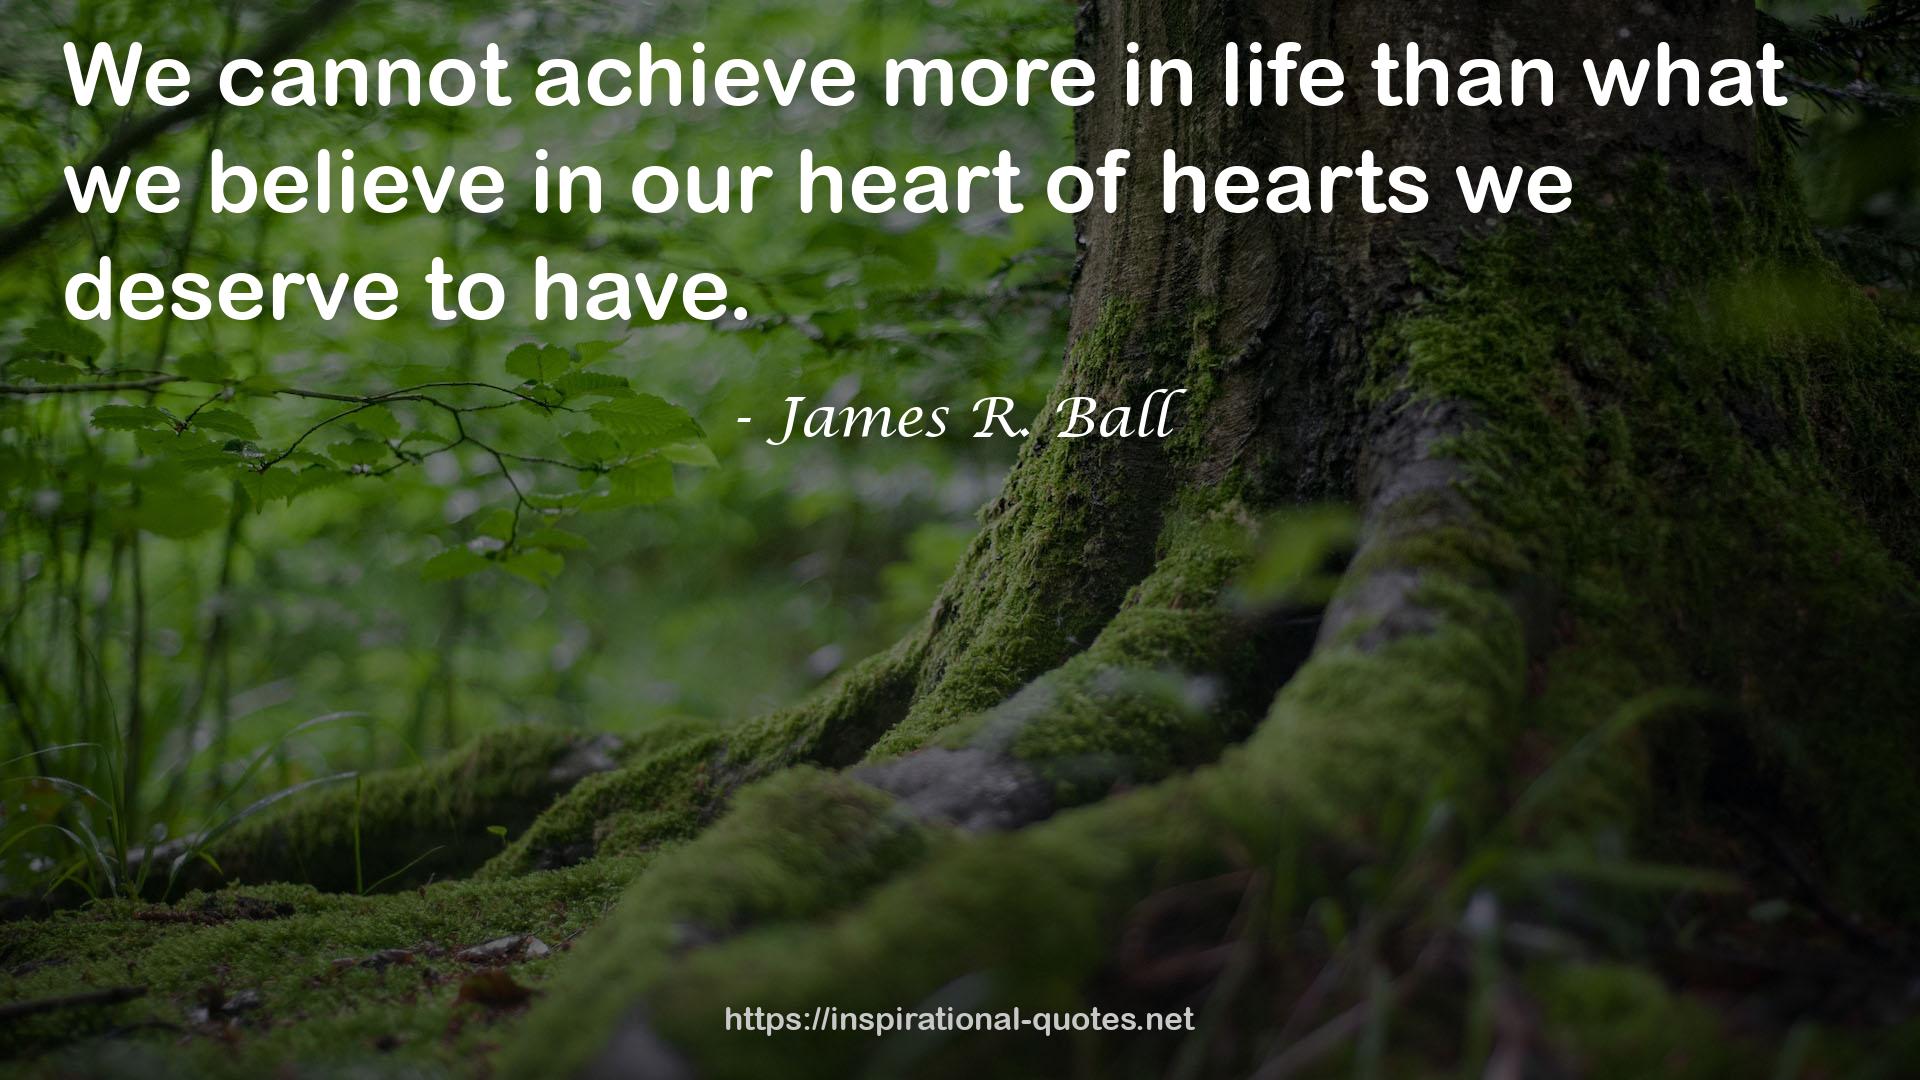 James R. Ball QUOTES